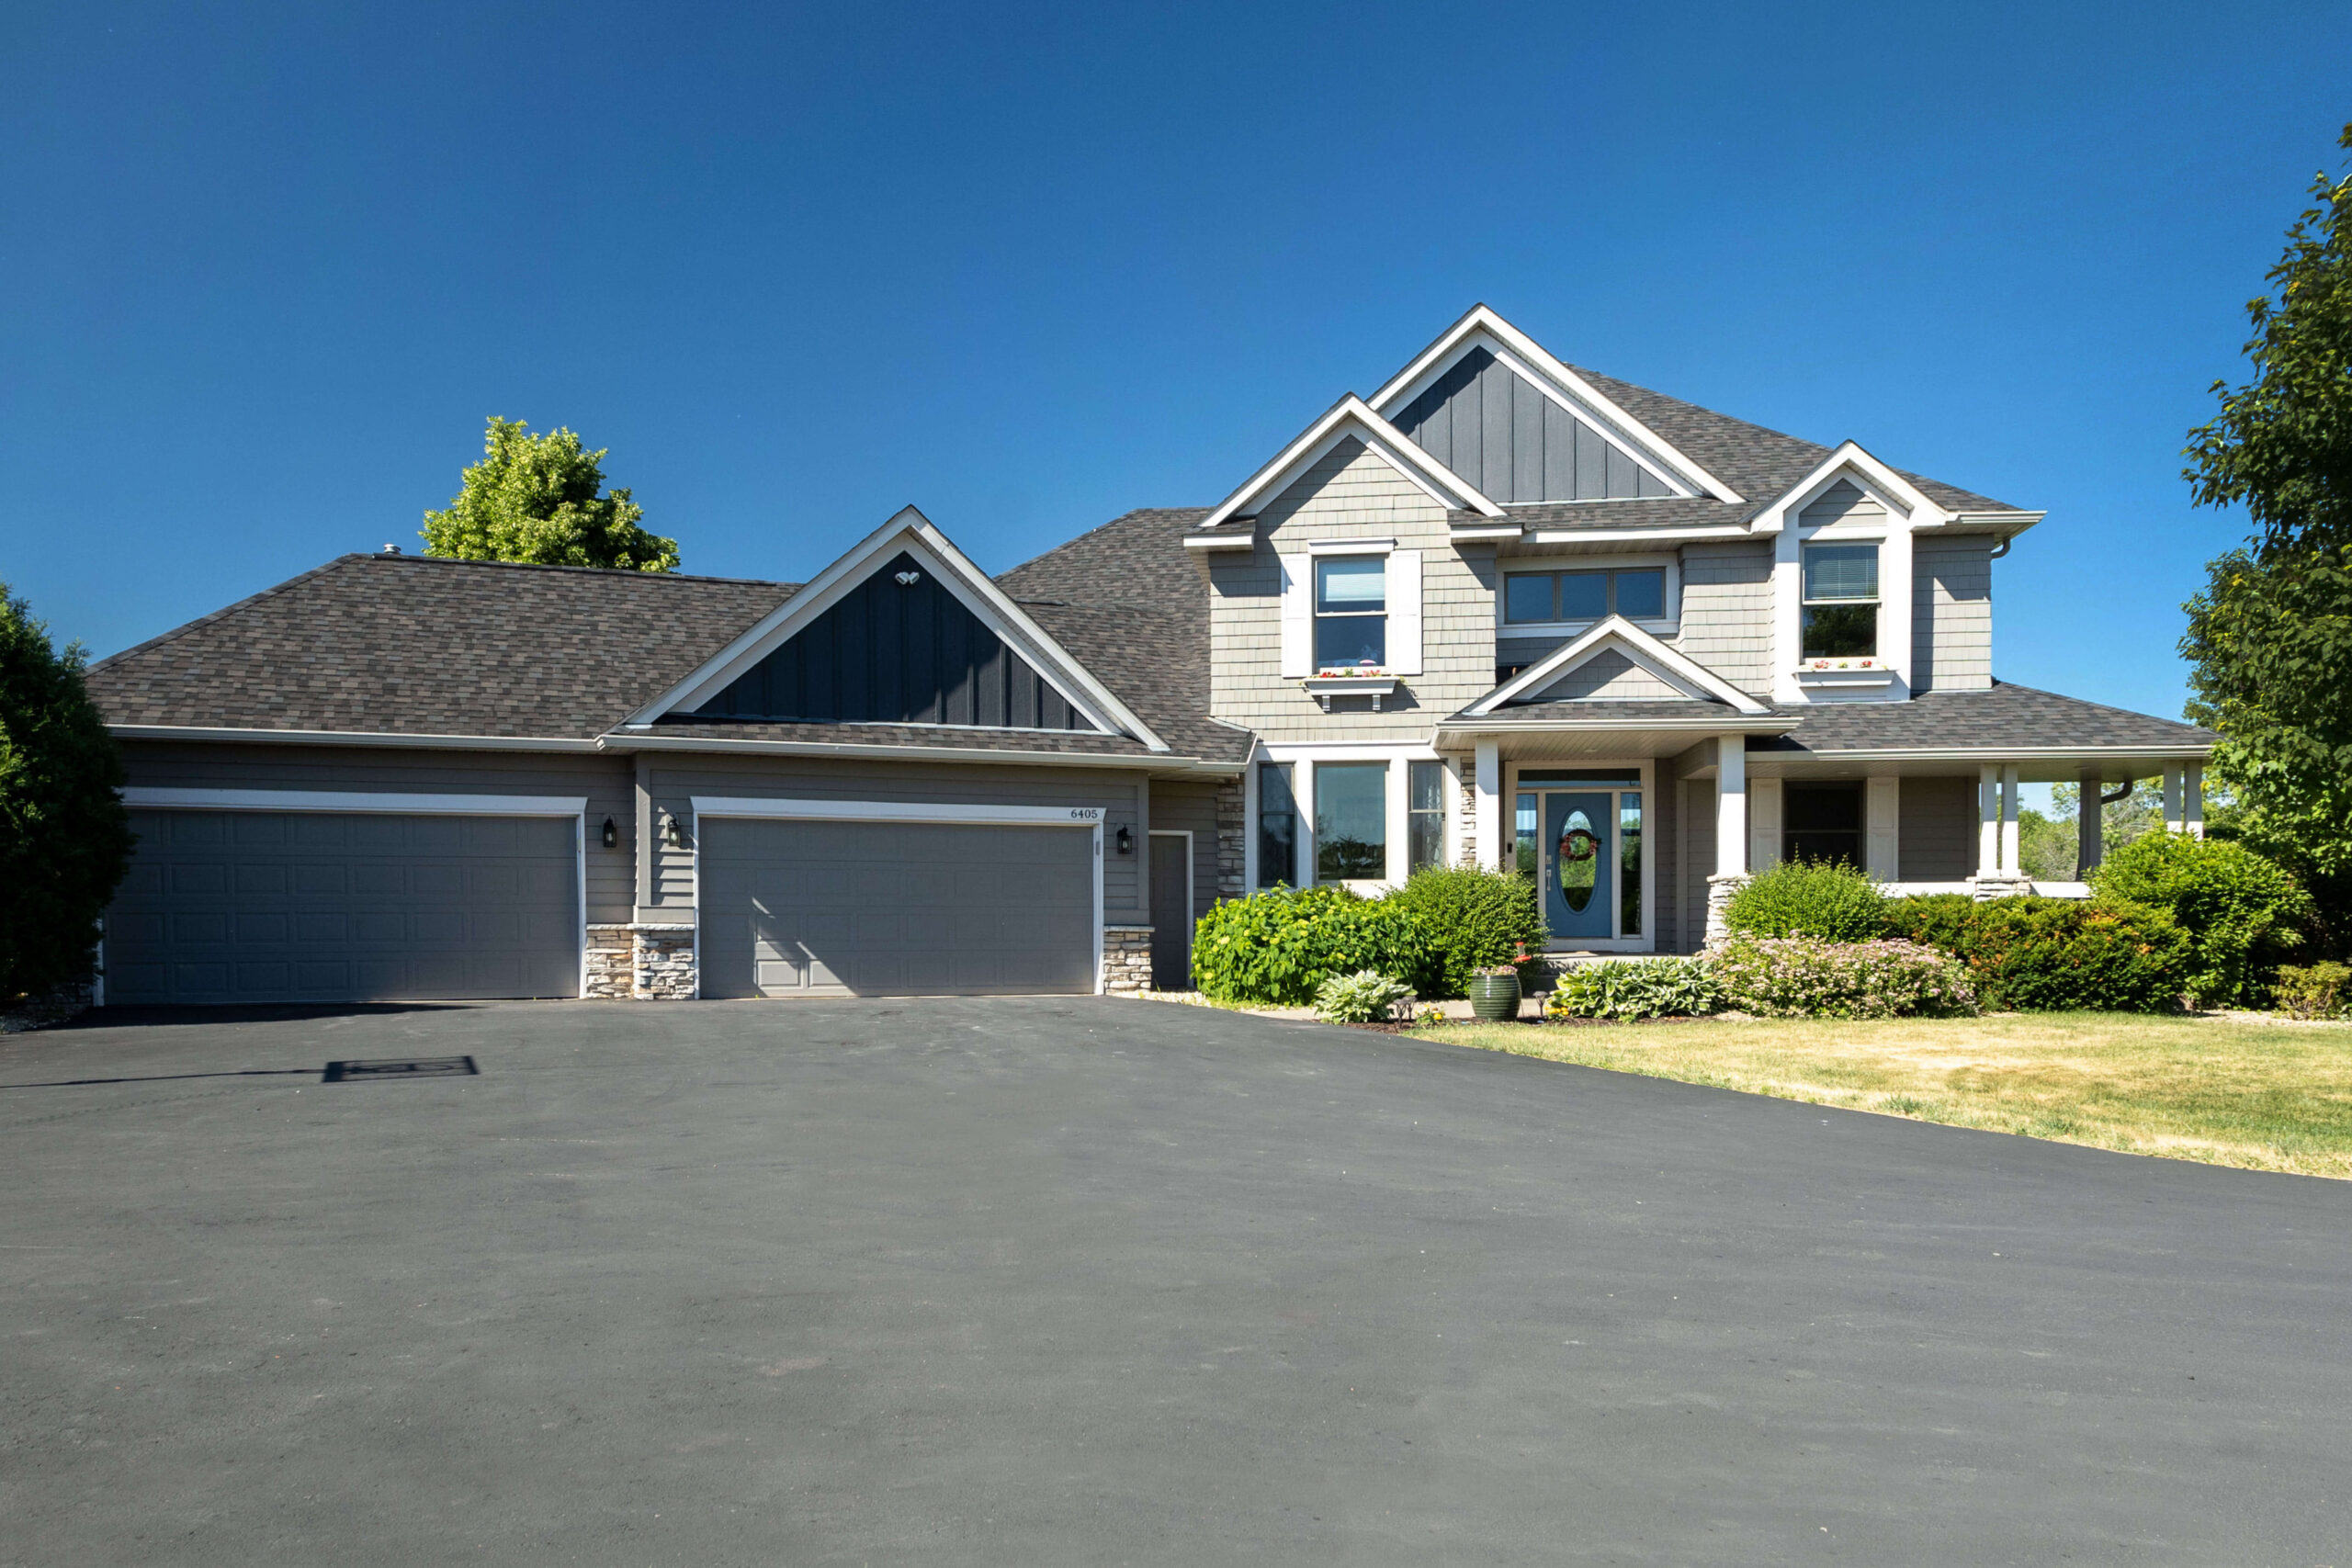 Beautiful home with two 2-car garages and a sealed, clean driveway